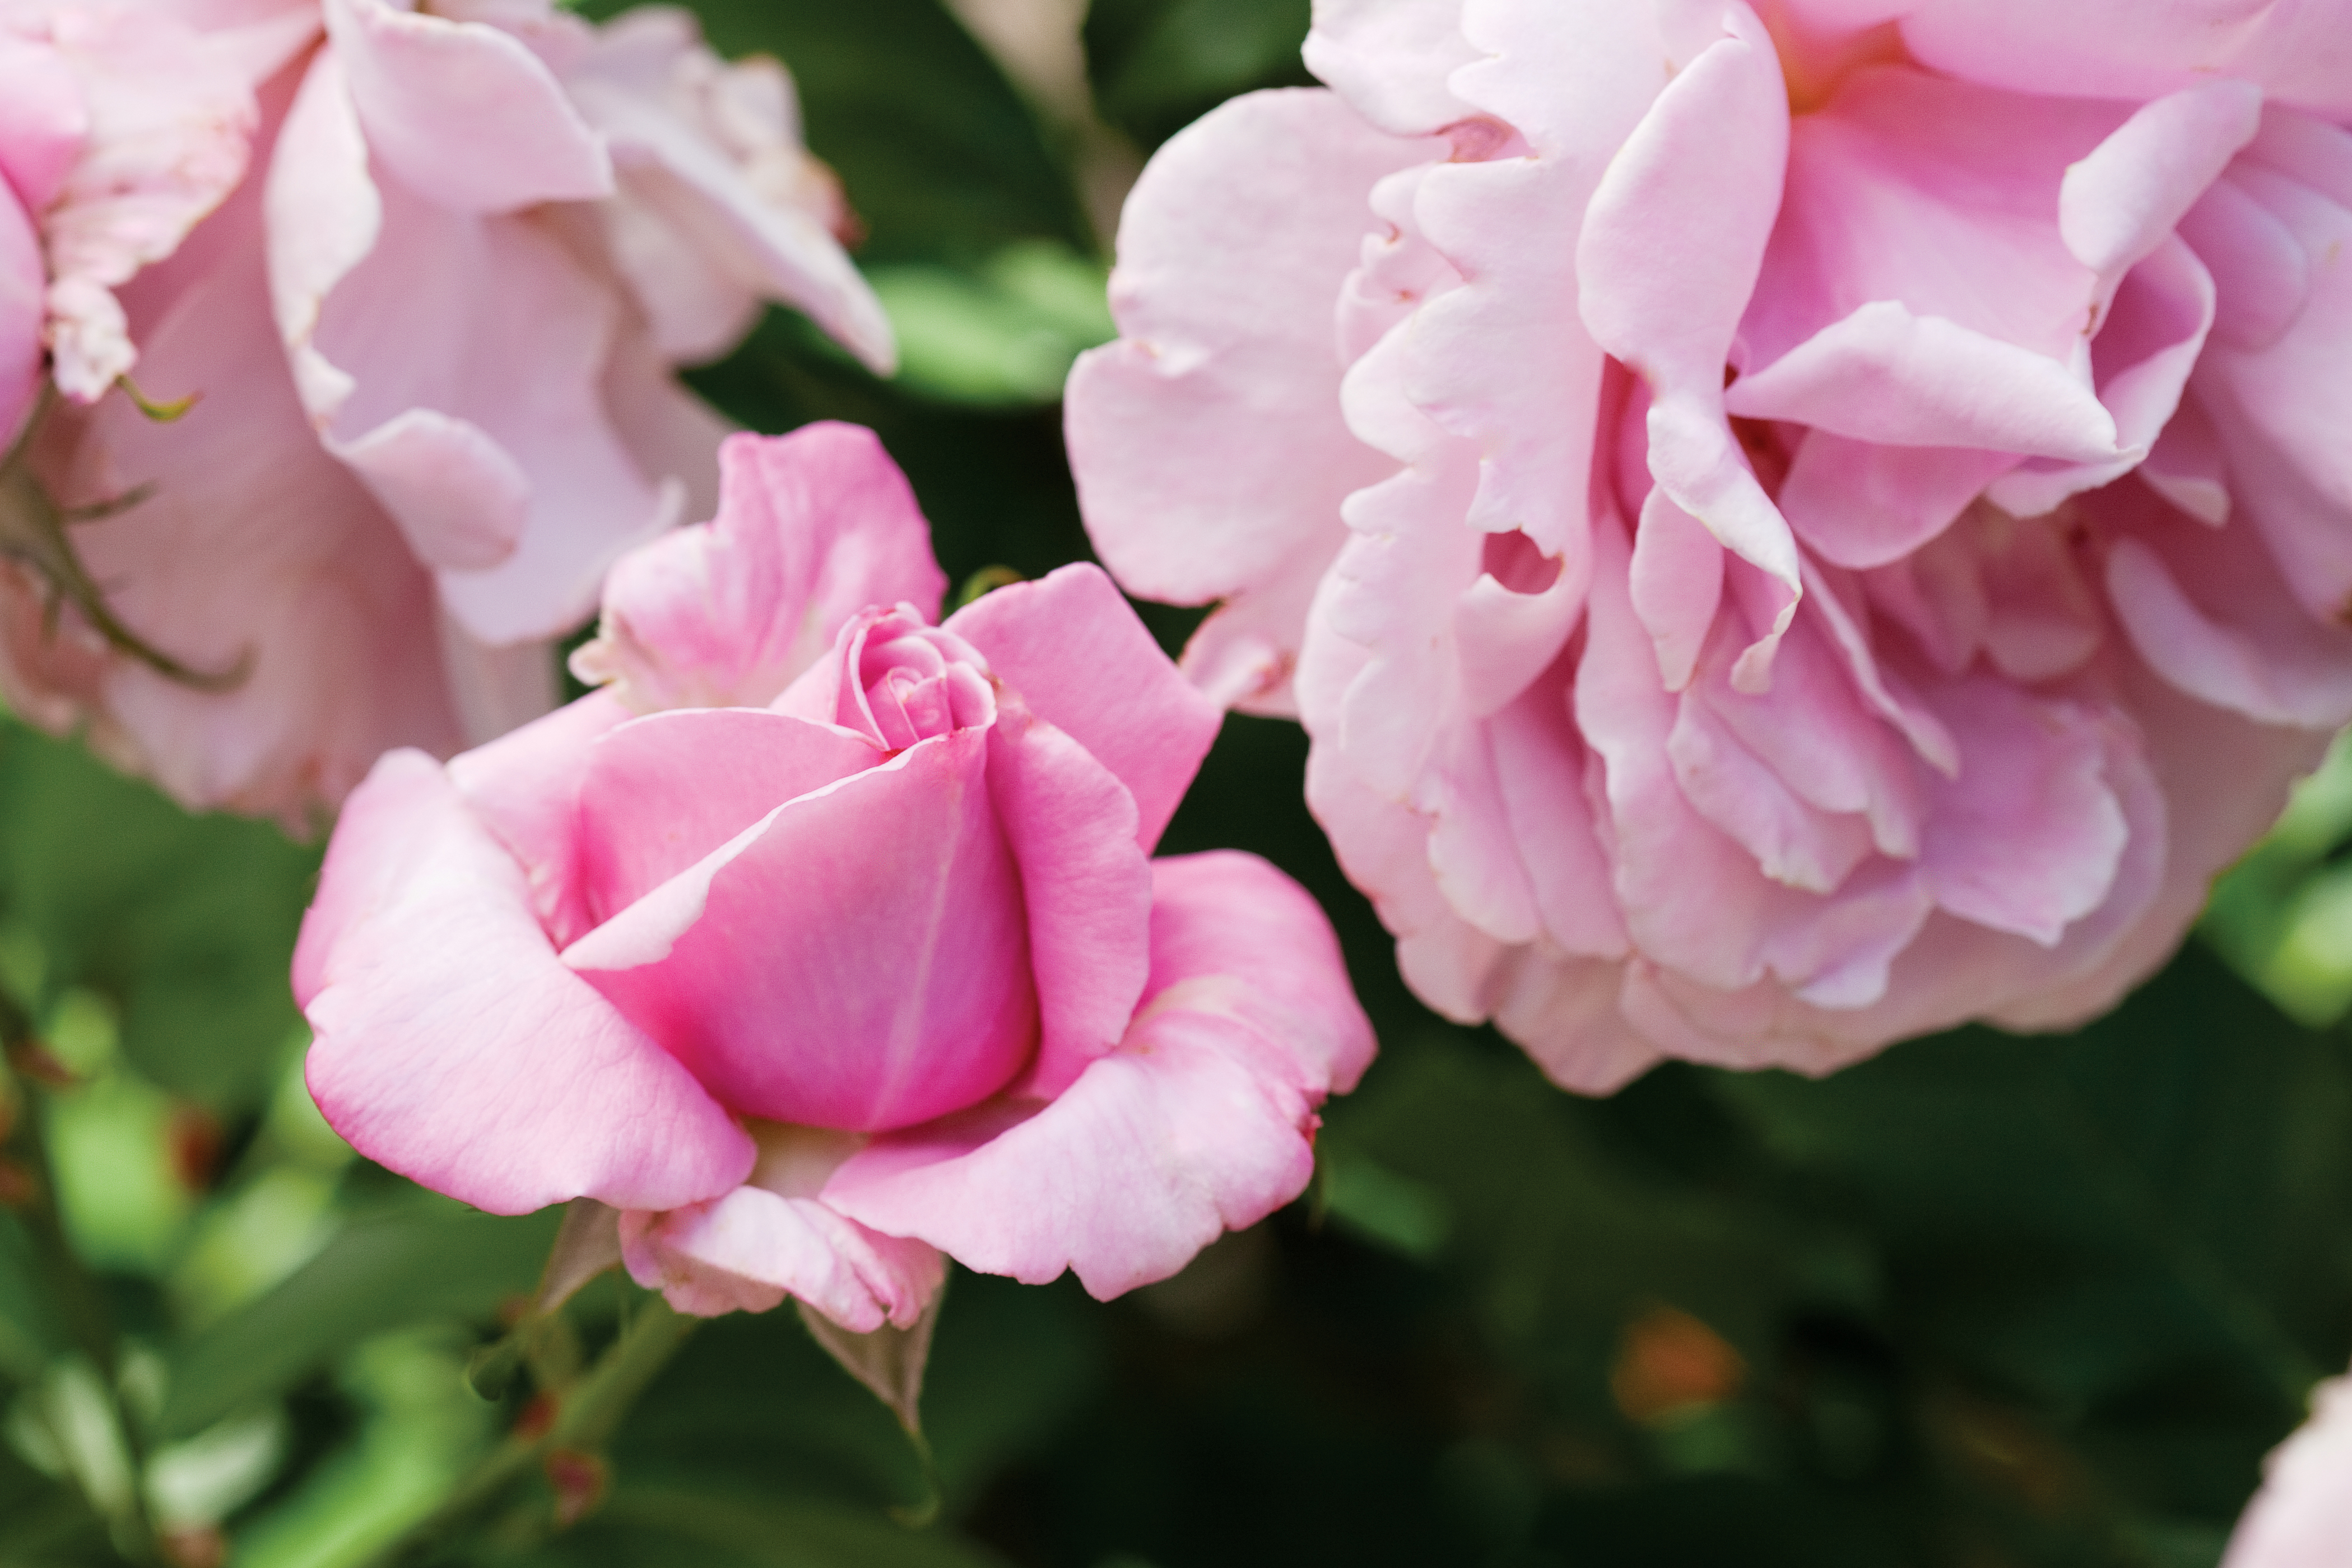 How to plant & care for roses